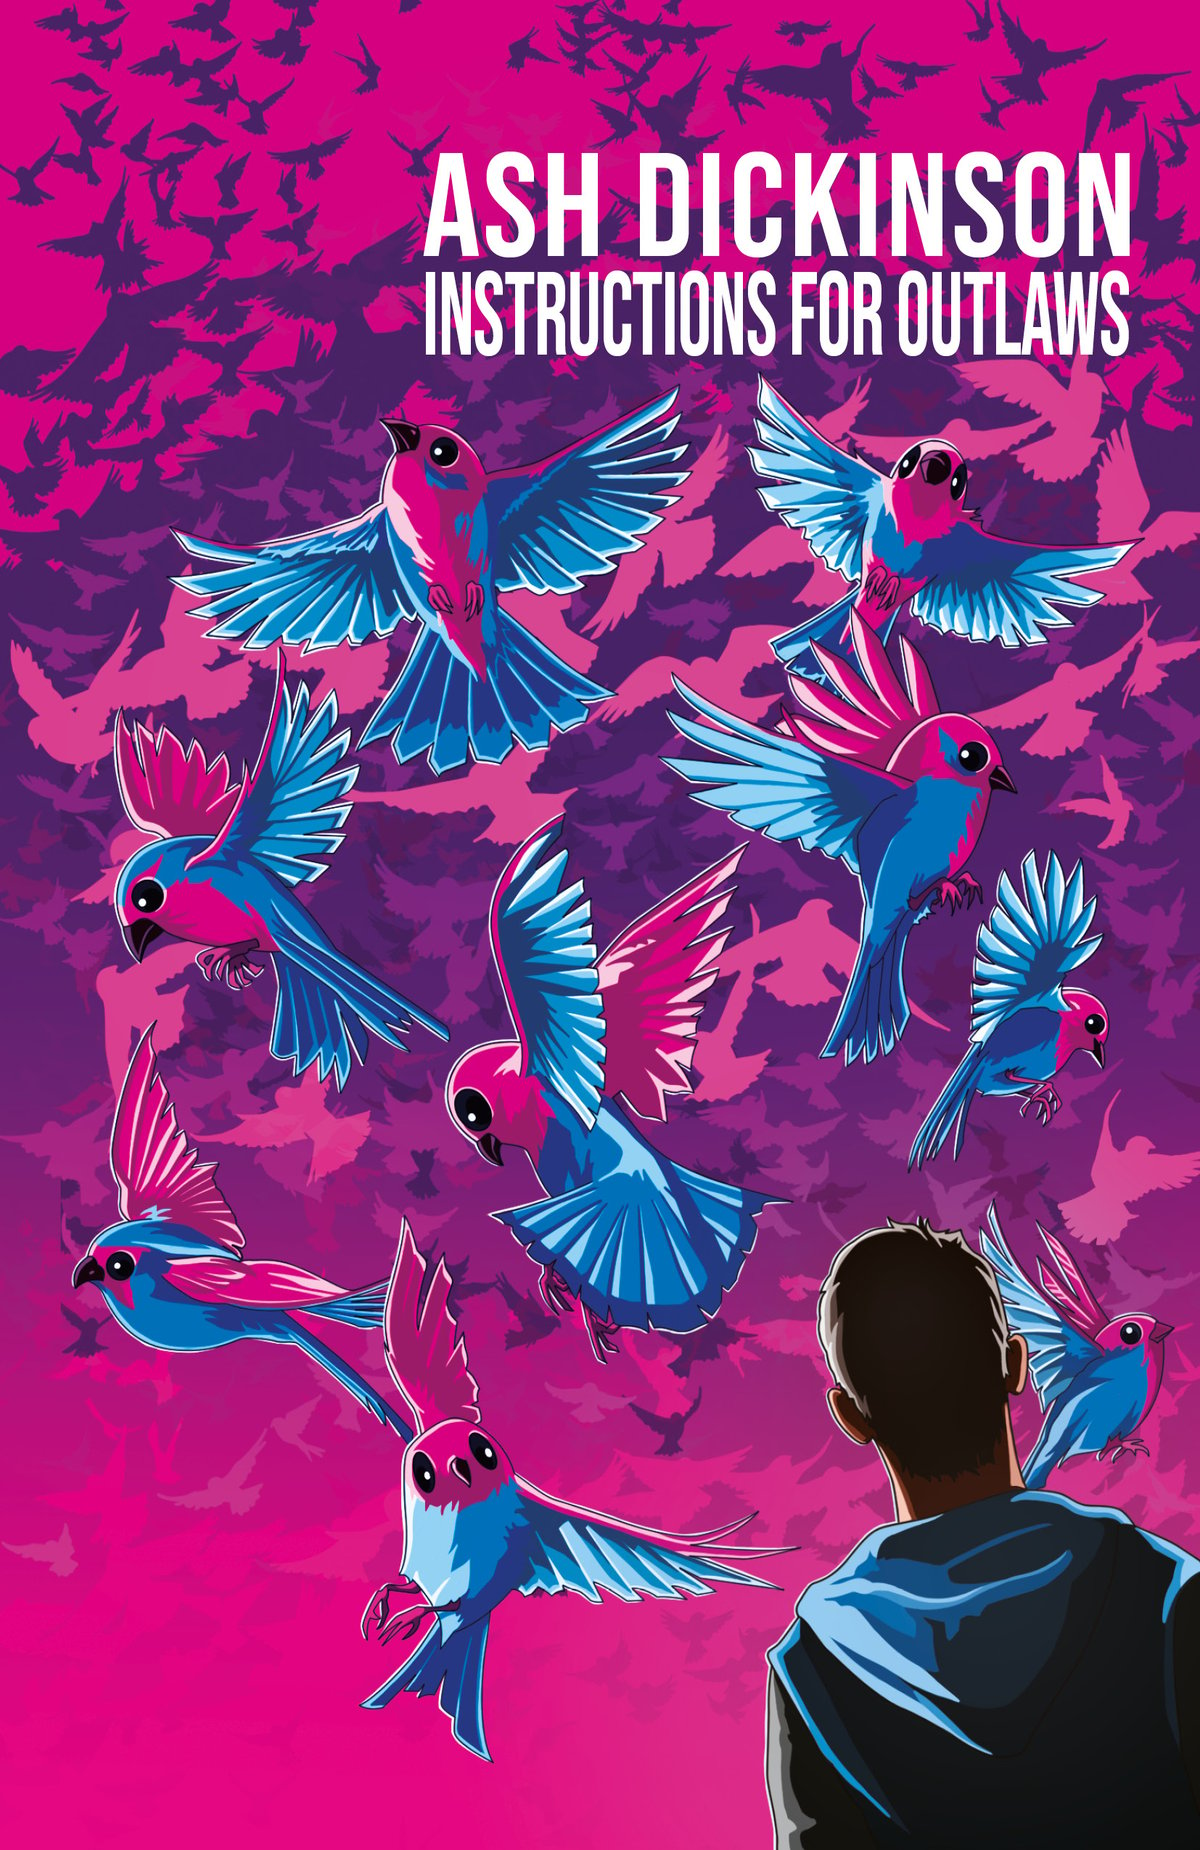 Image of Instructions for Outlaws by Ash Dickinson